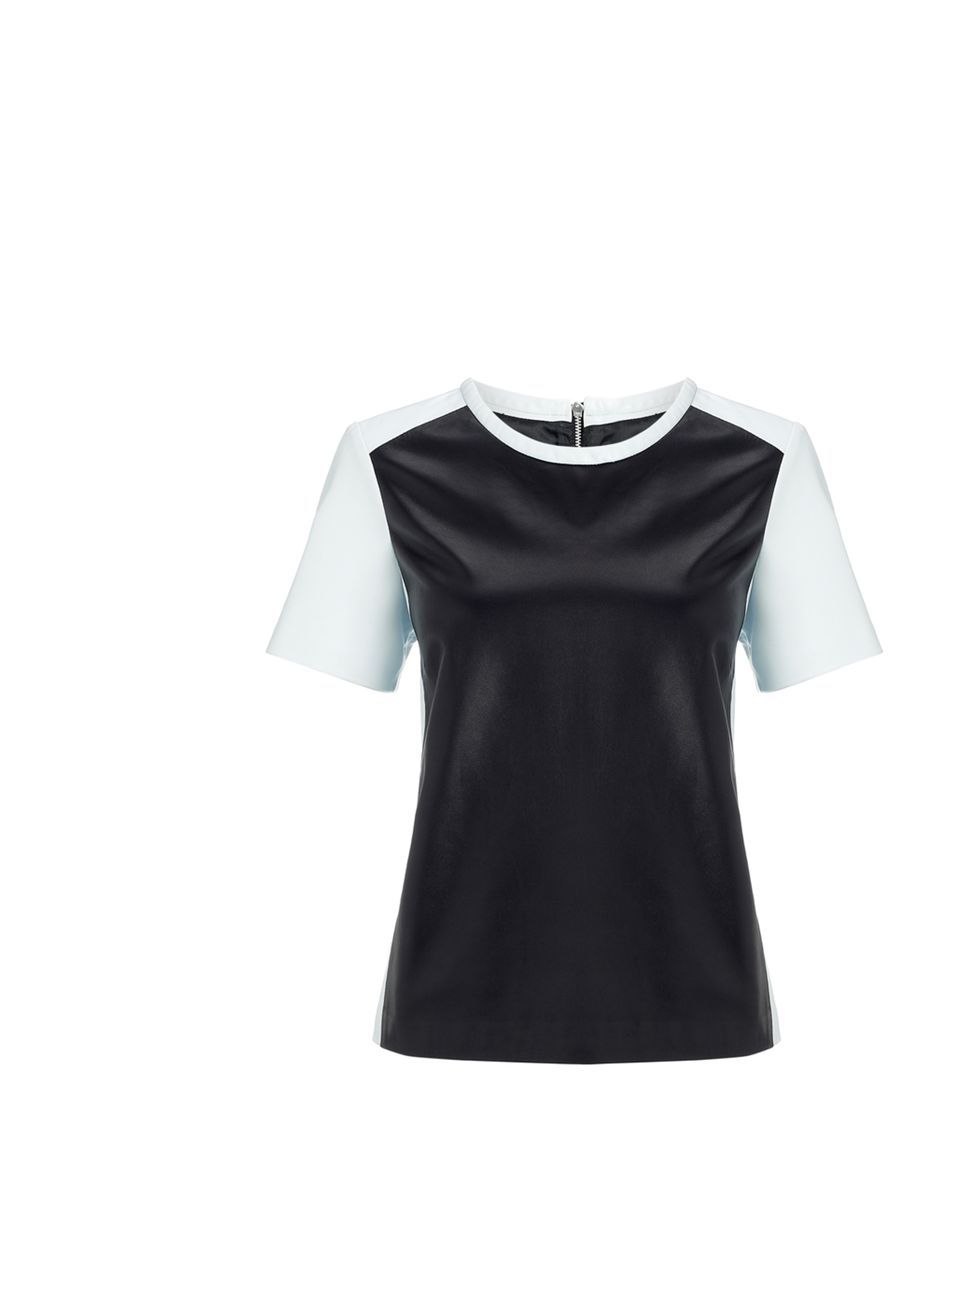 <p>Bonnie Rakhit, Market and Retail Editor: 'I've been in love with leather this season, from leather trousers to dresses to pencil skirts. Now thanks to the sales I can add a leather tee to my collection.'</p><p>Whistles monochrome leather T-shirt, was £